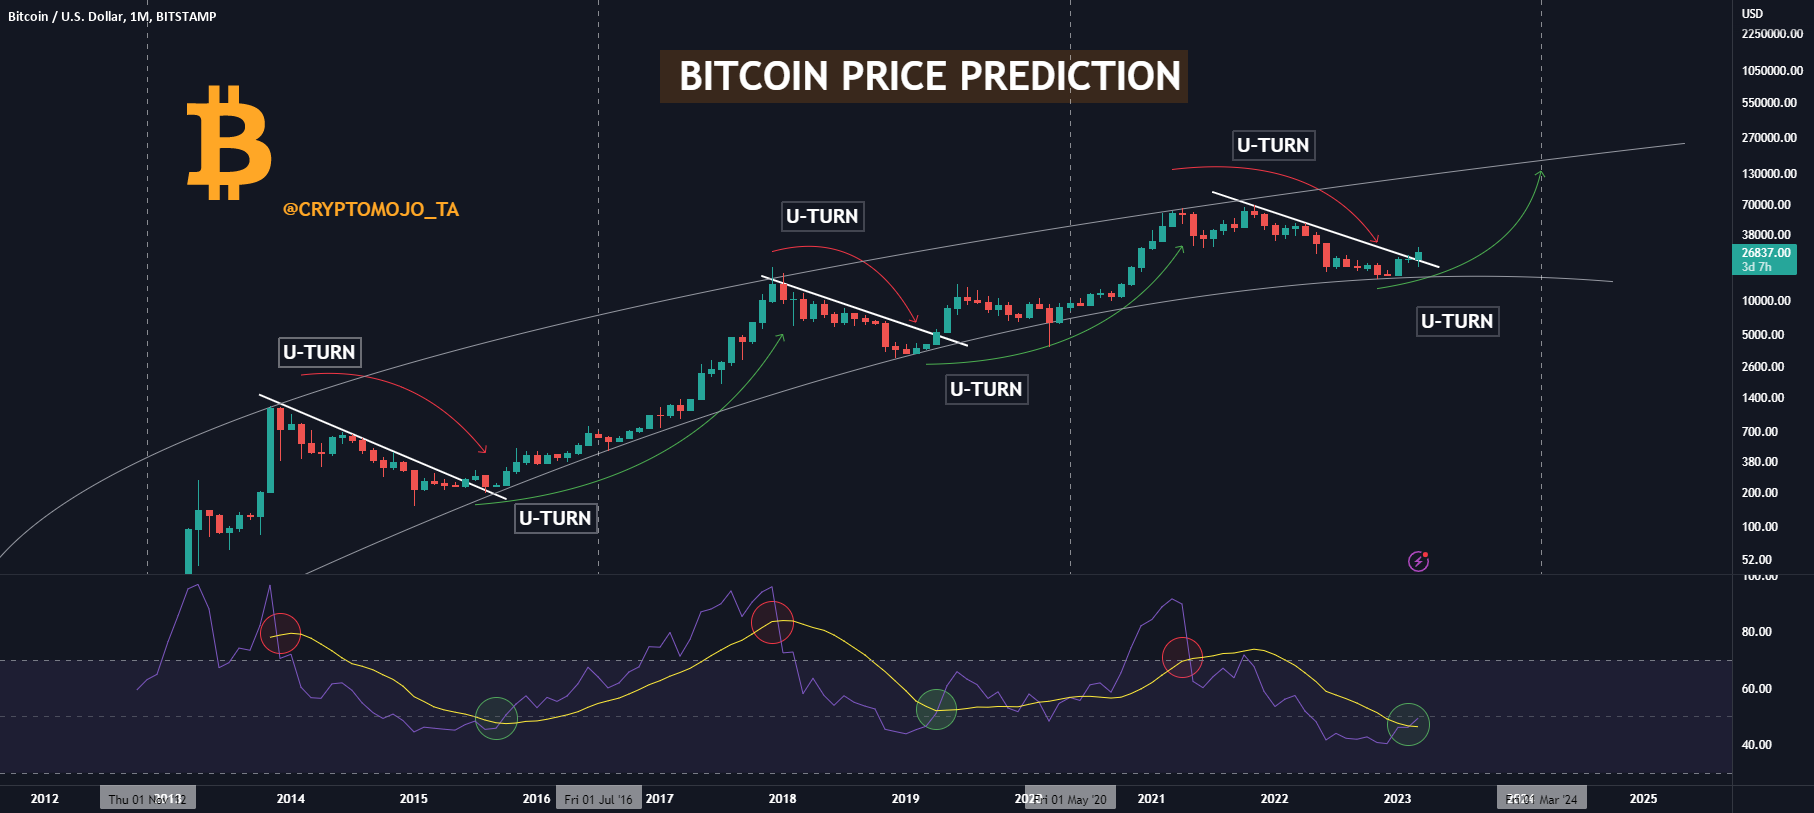 Bitcoin Price Forecast: Bitcoin's Future Is Predicted In October 